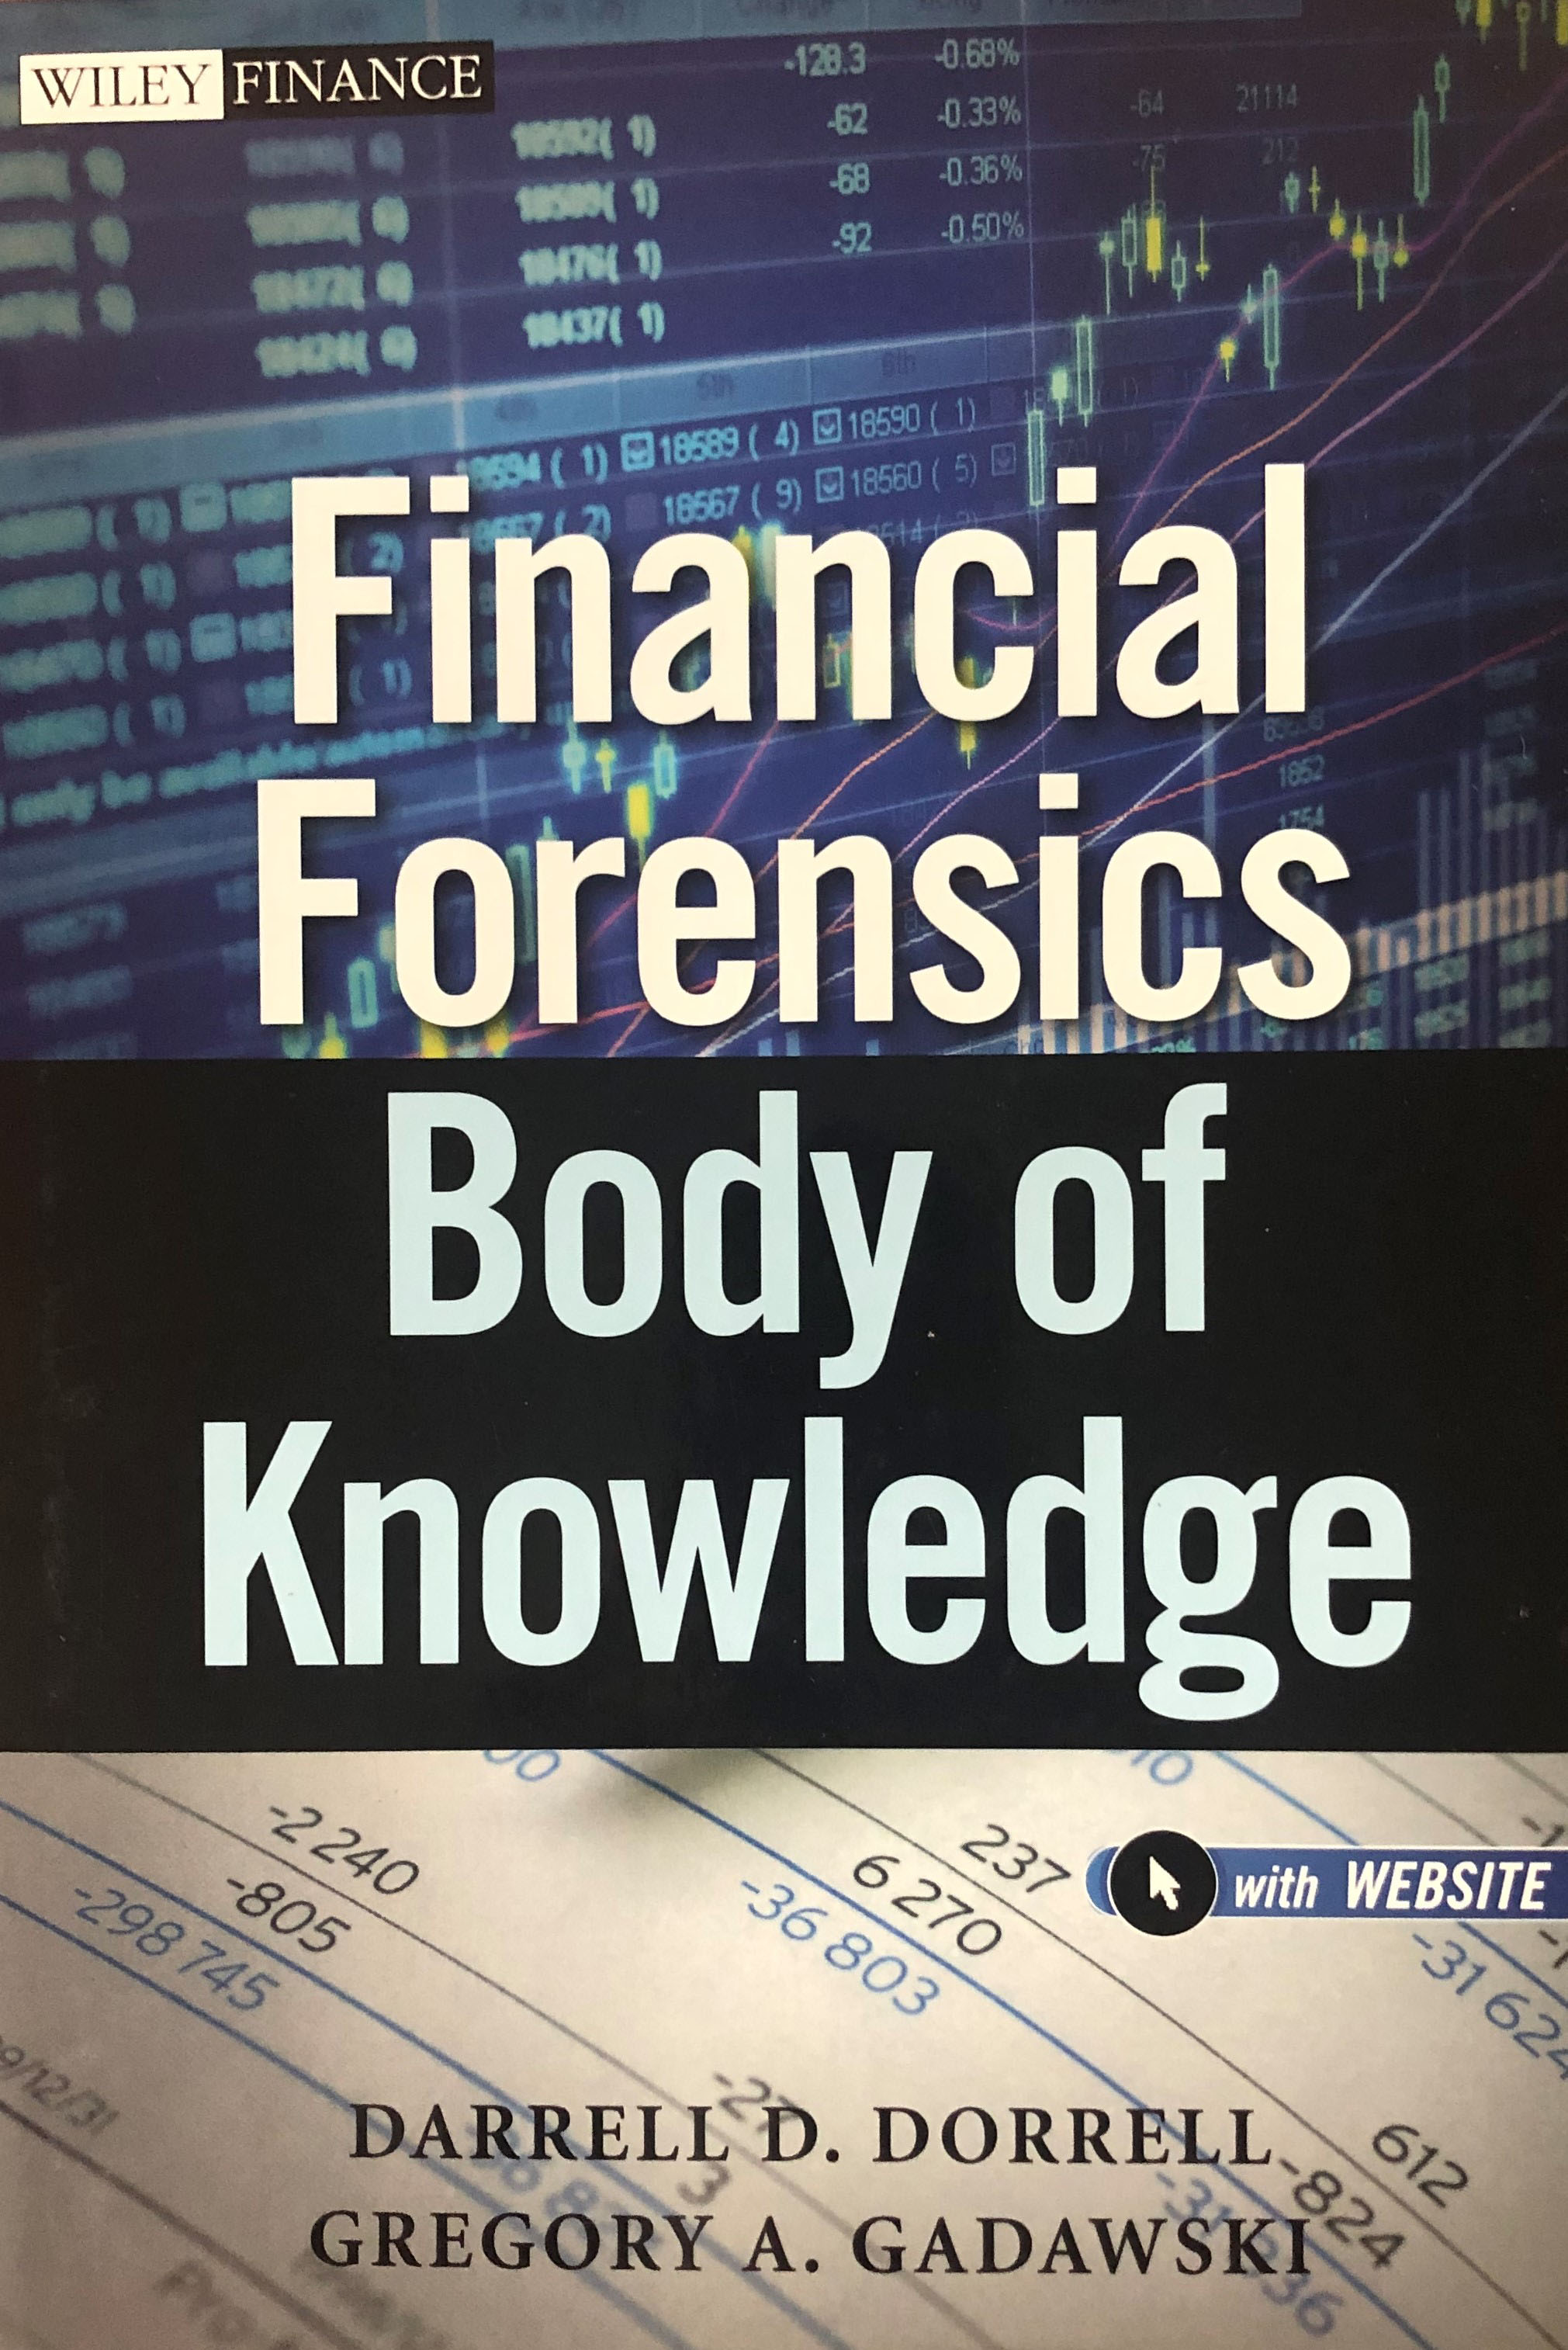 Description Financial Forensics Body of Knowledge